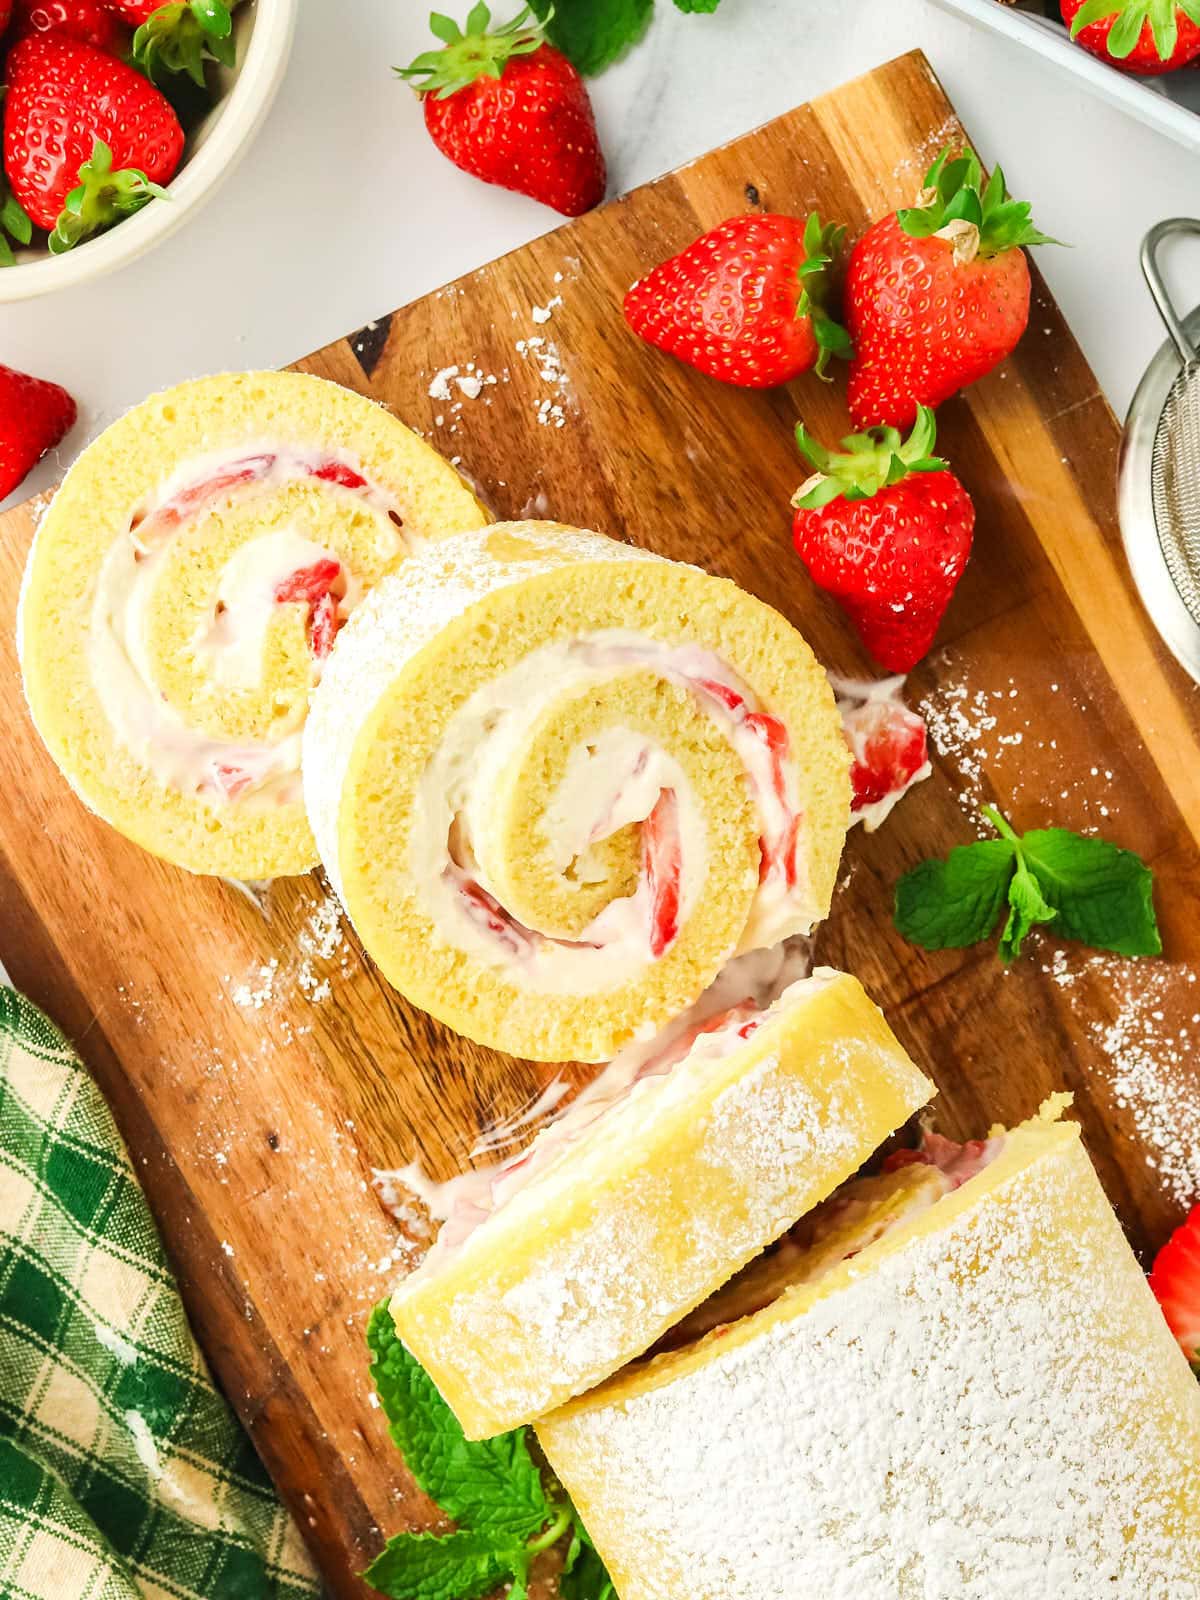 A strawberry roll with whipped cream and strawberries on a cutting board.